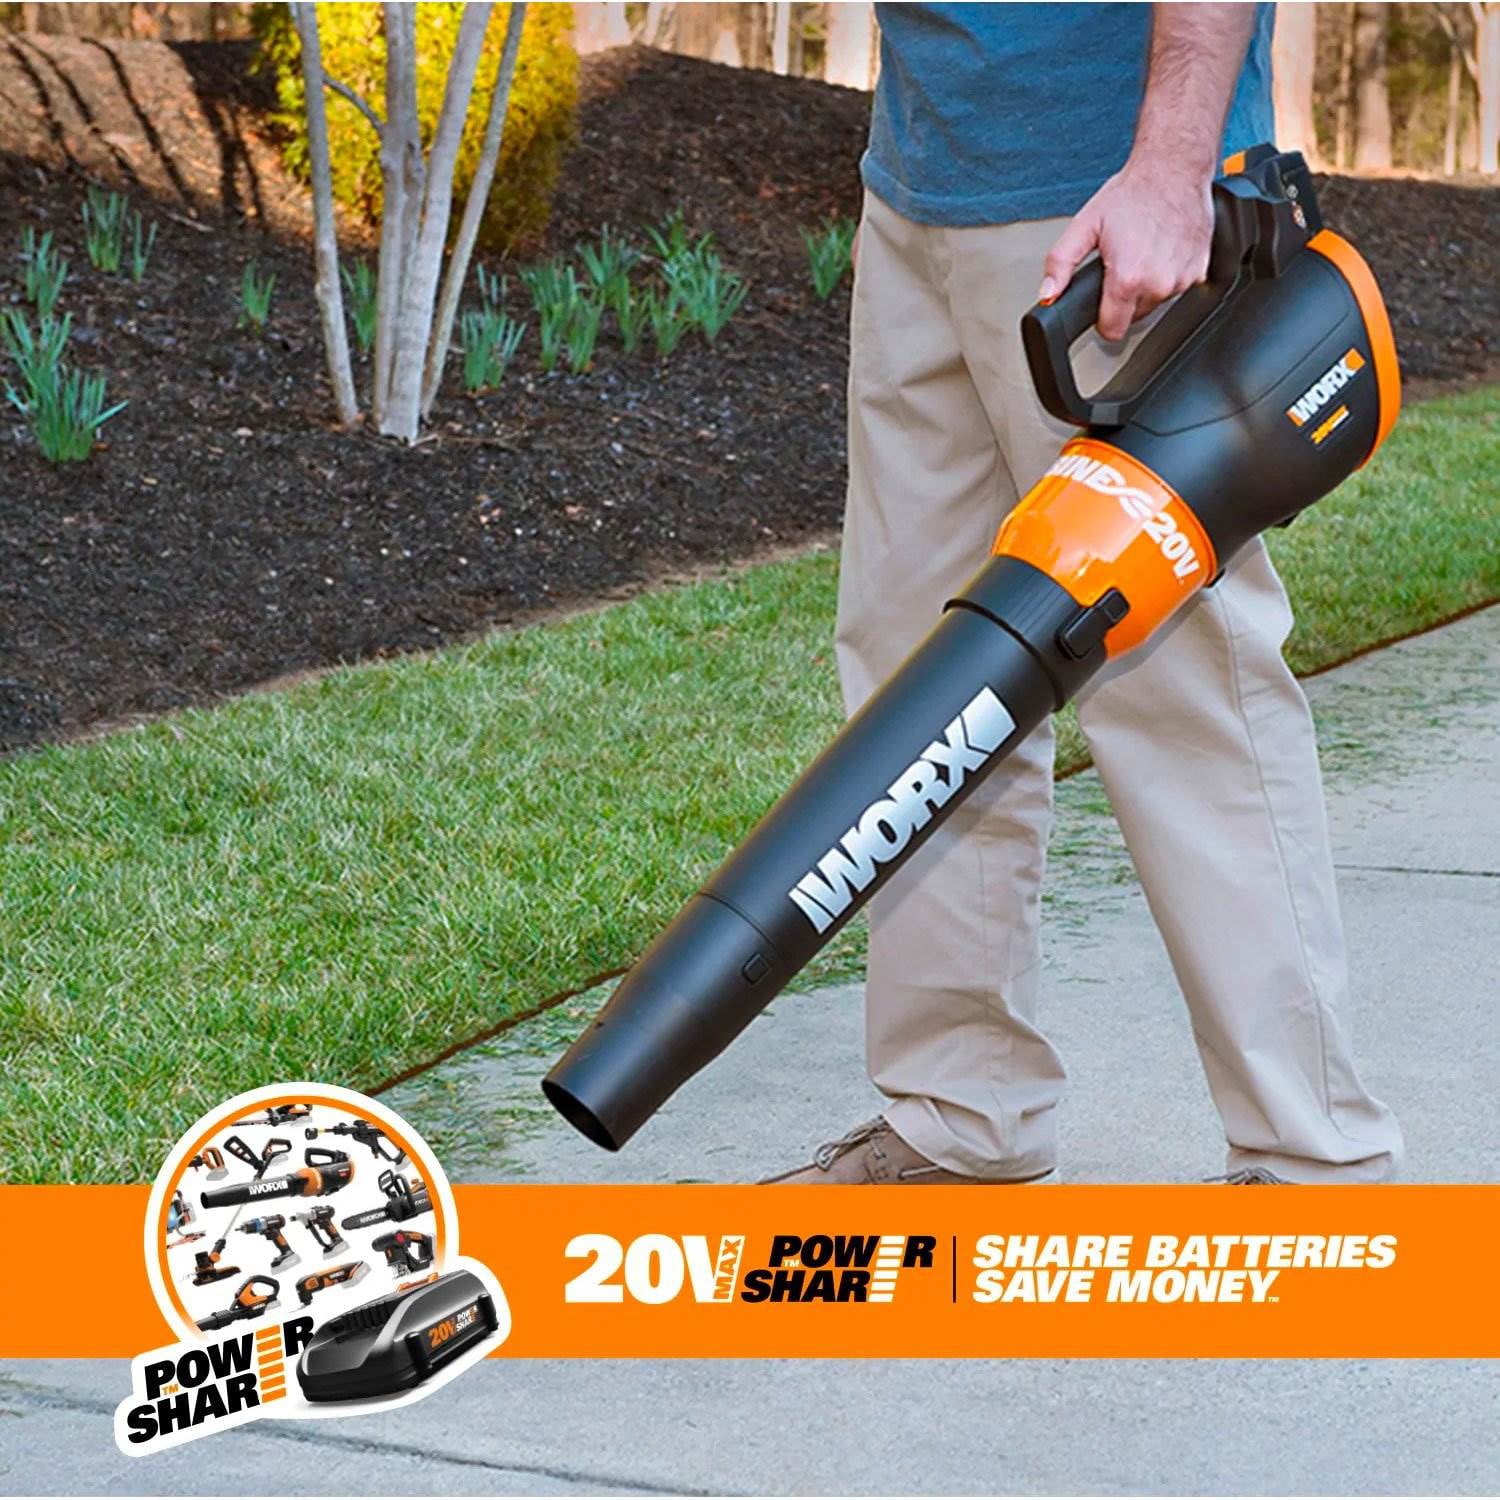 Charger Batteries 4.0Ah Worx WG954.1 20V Revolution Grass Trimmer/Edger and Turbine Blower Combo Kit with two 20V 